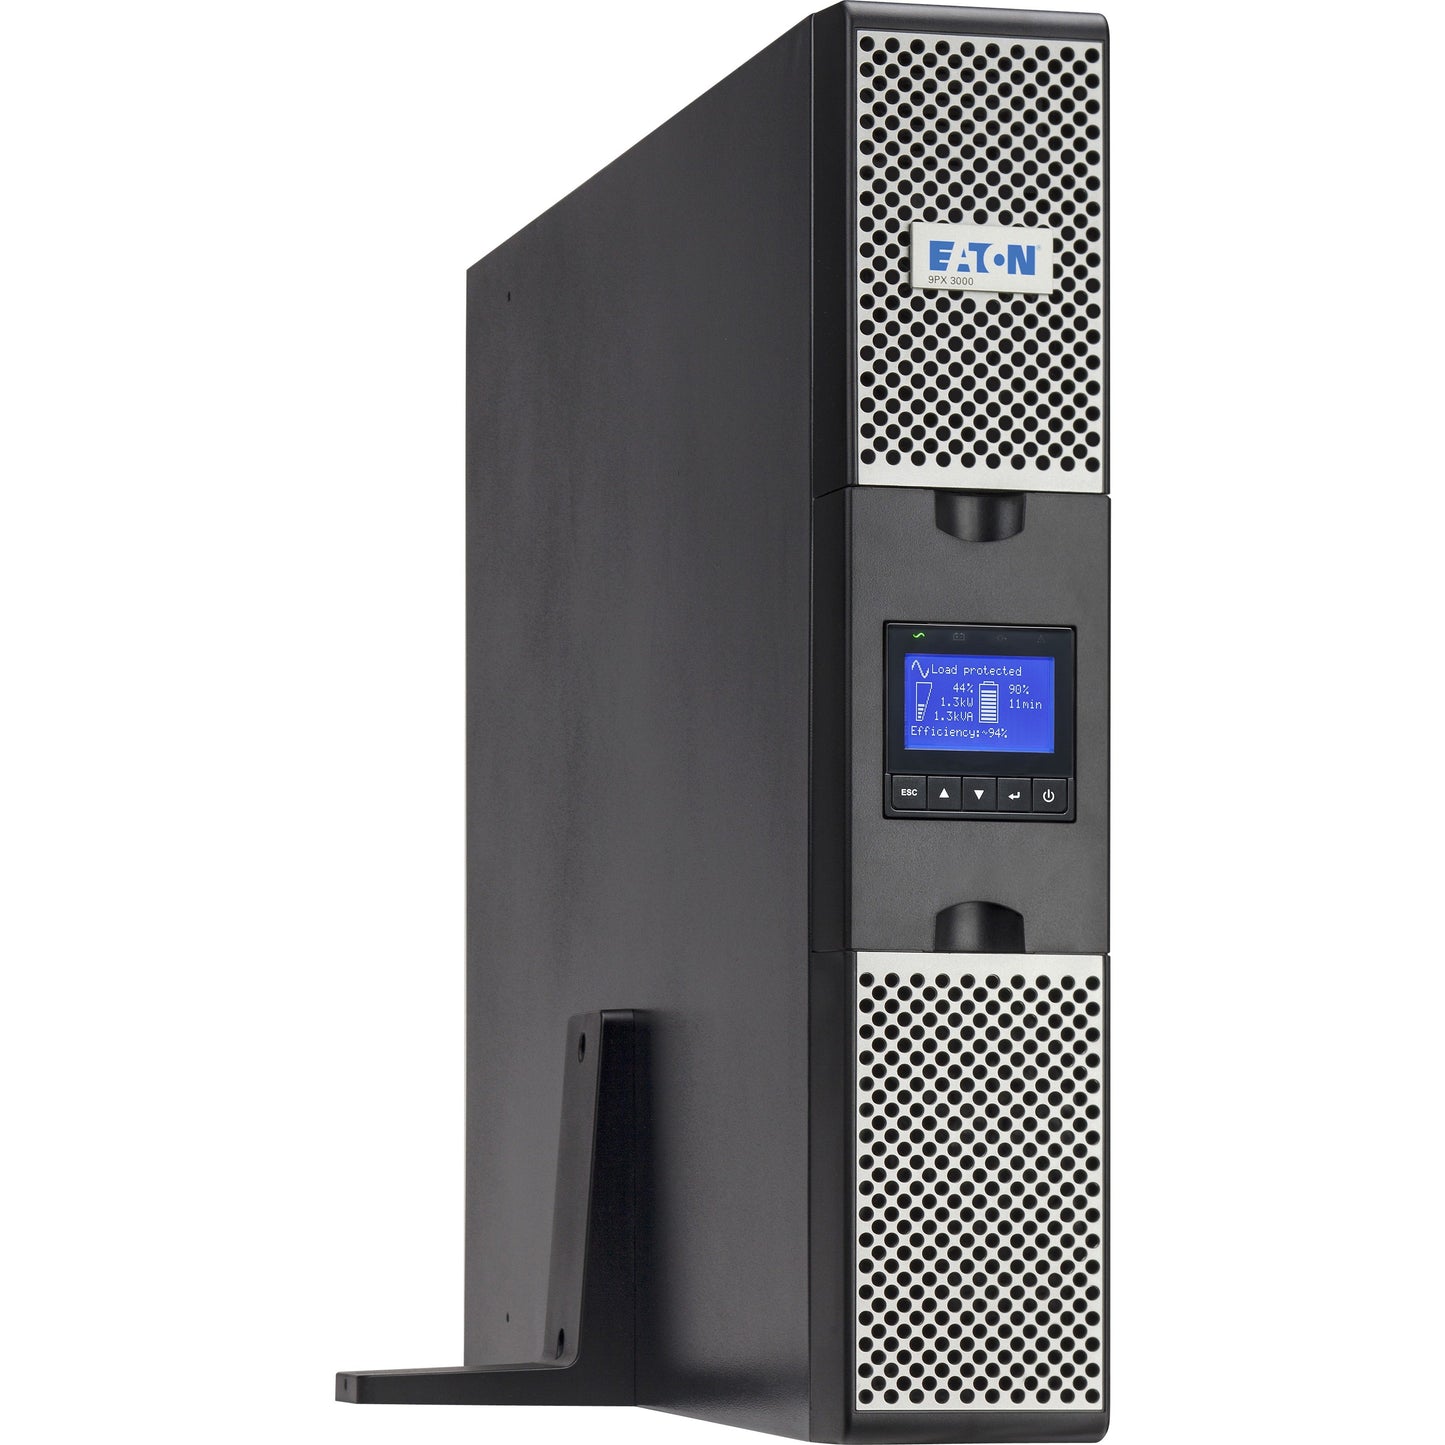 Eaton 9PX 2000VA 1800W 120V Online Double-Conversion UPS - 5-20P 6x 5-20R 1 L5-20R Outlets Cybersecure Network Card Option Extended Run 2U Rack/Tower